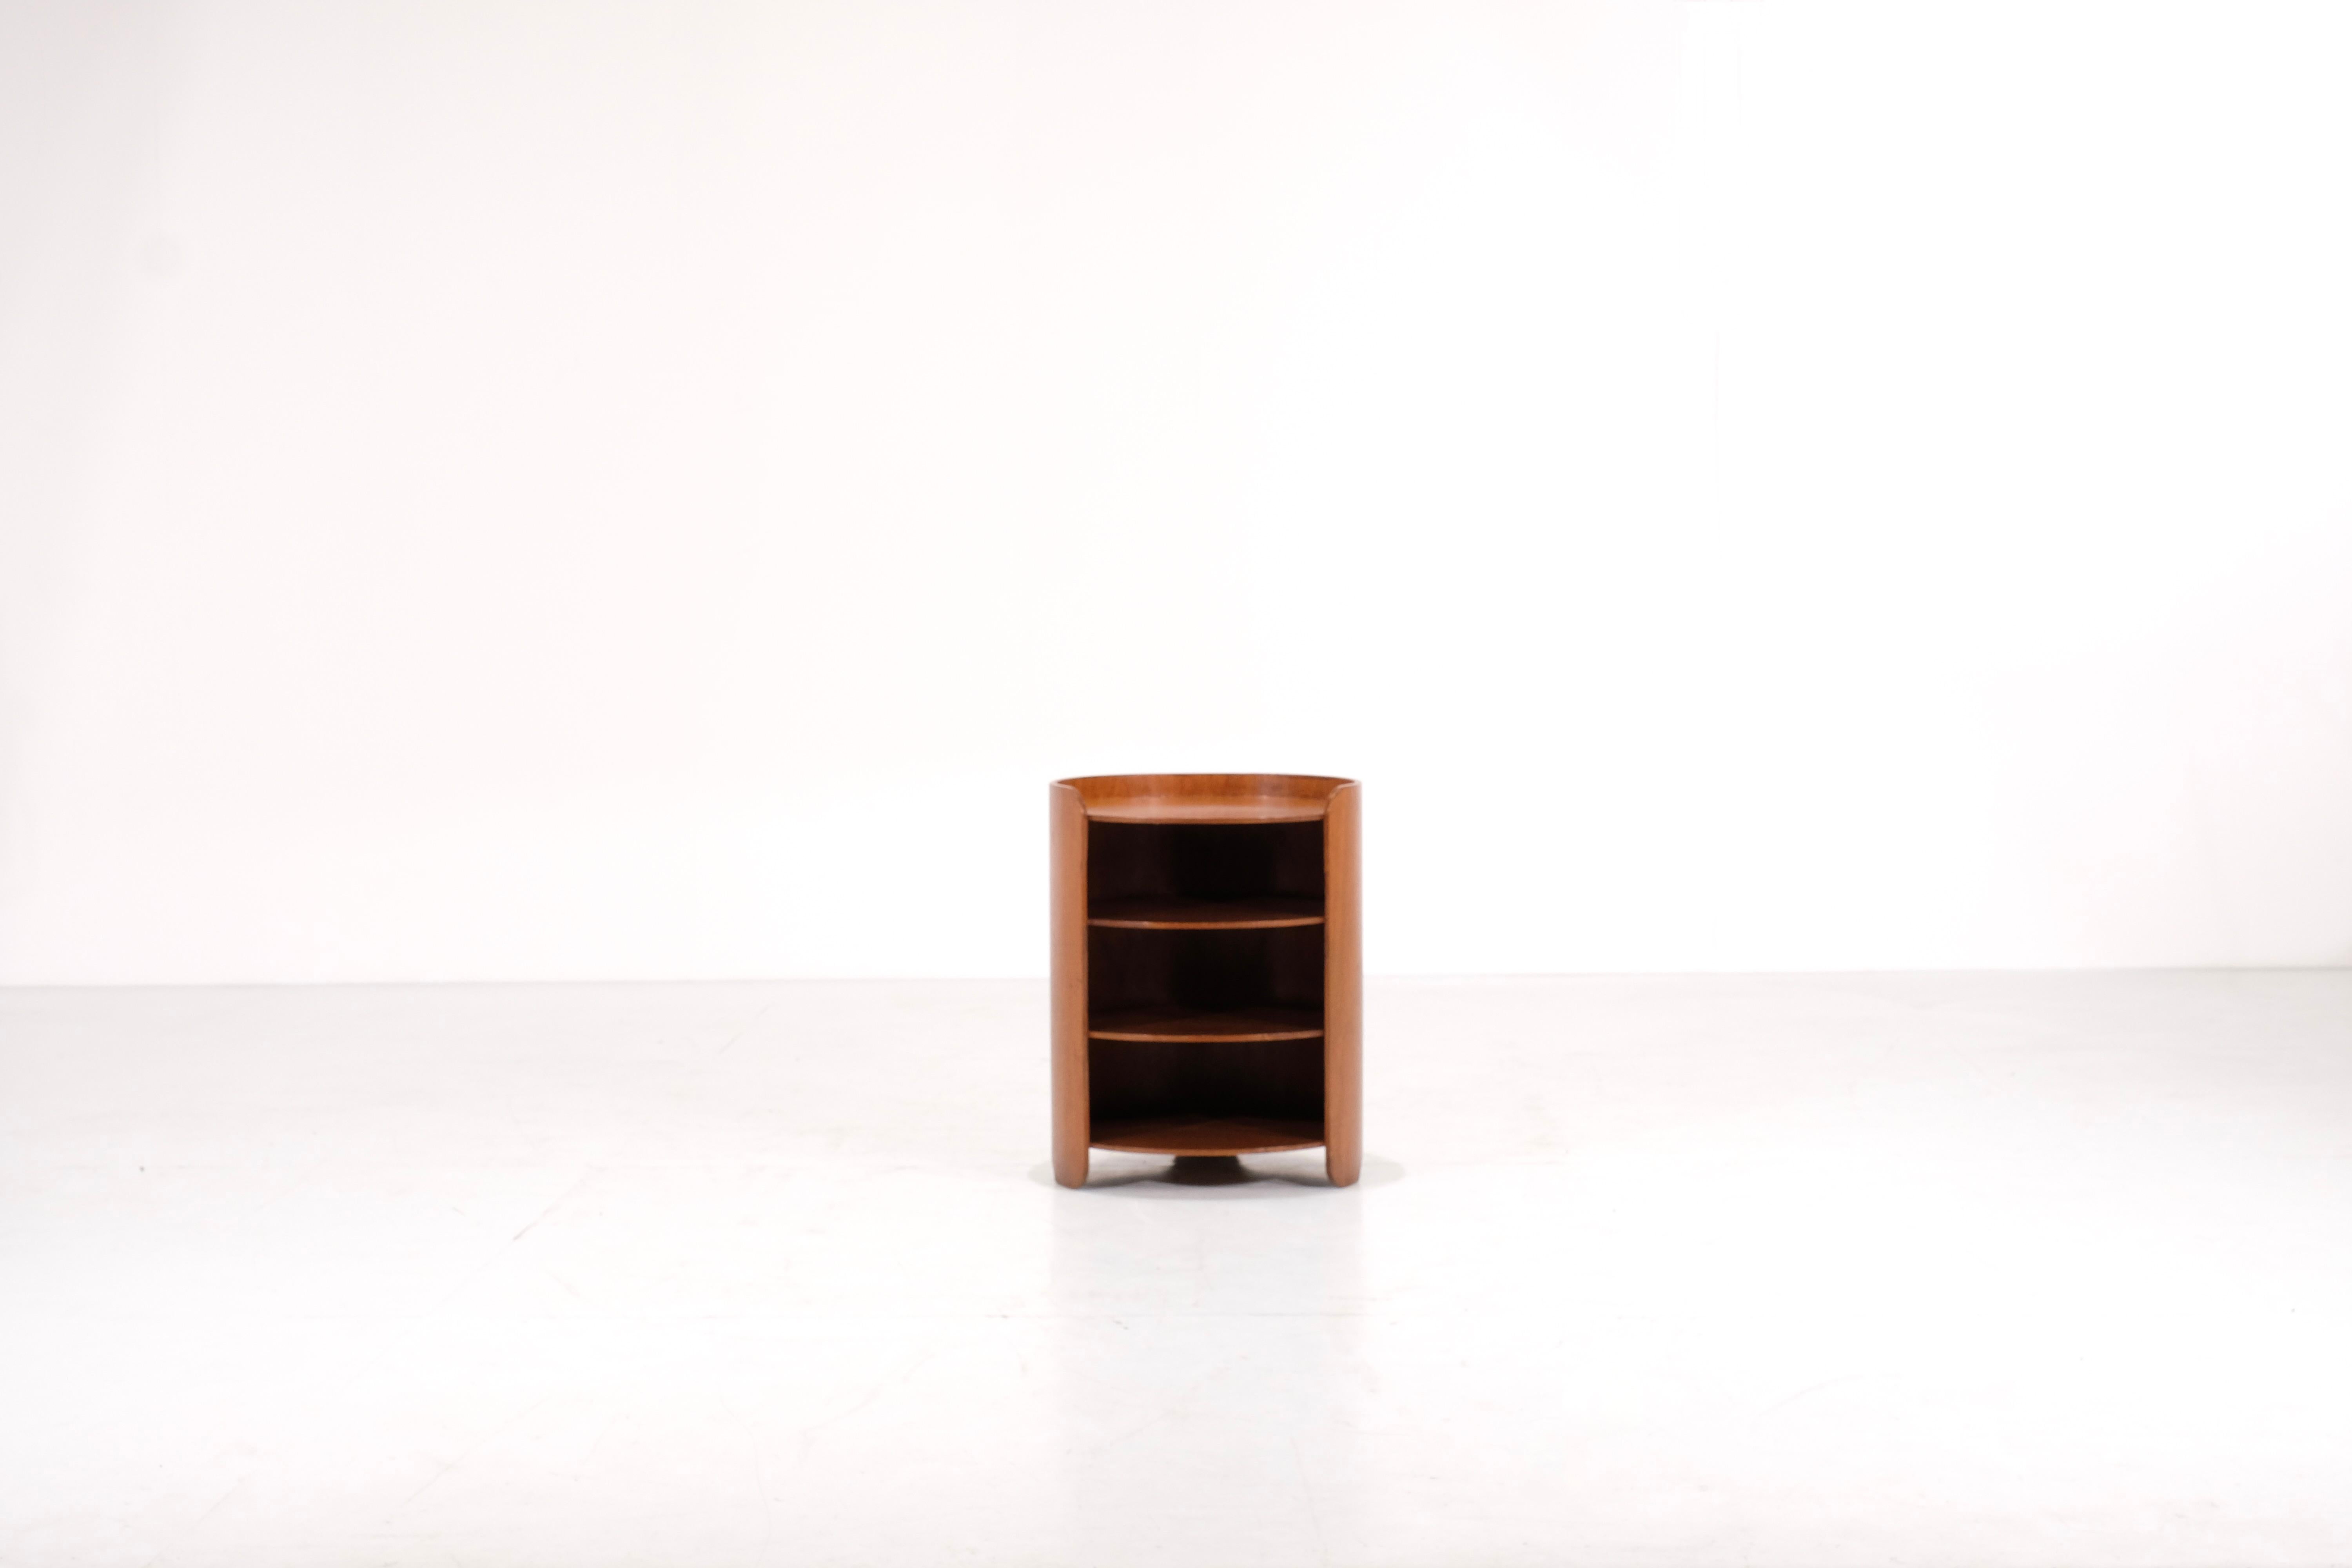 Rare bedside table or storage unit in walnut designed by Luigi Caccia Dominioni for Azucena in 1962.
it will fit perfectly in your bedroom or in the hall of an appartement thanks to its practical size
Its name is Casaccia and reminds us of the name